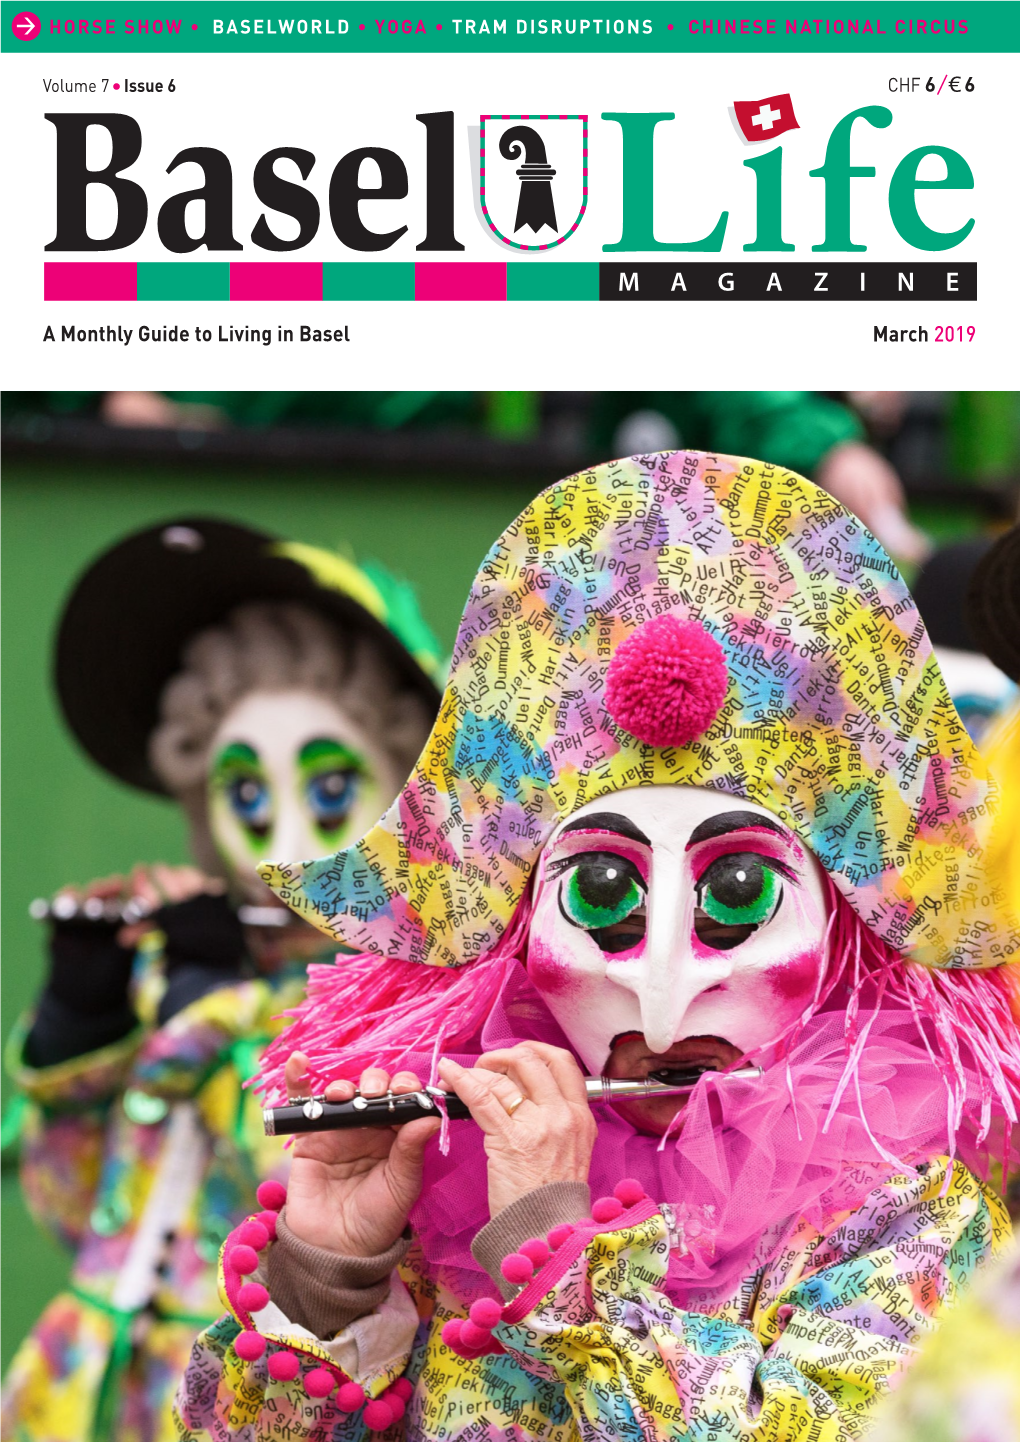 March 2019 a Monthly Guide to Living in Basel